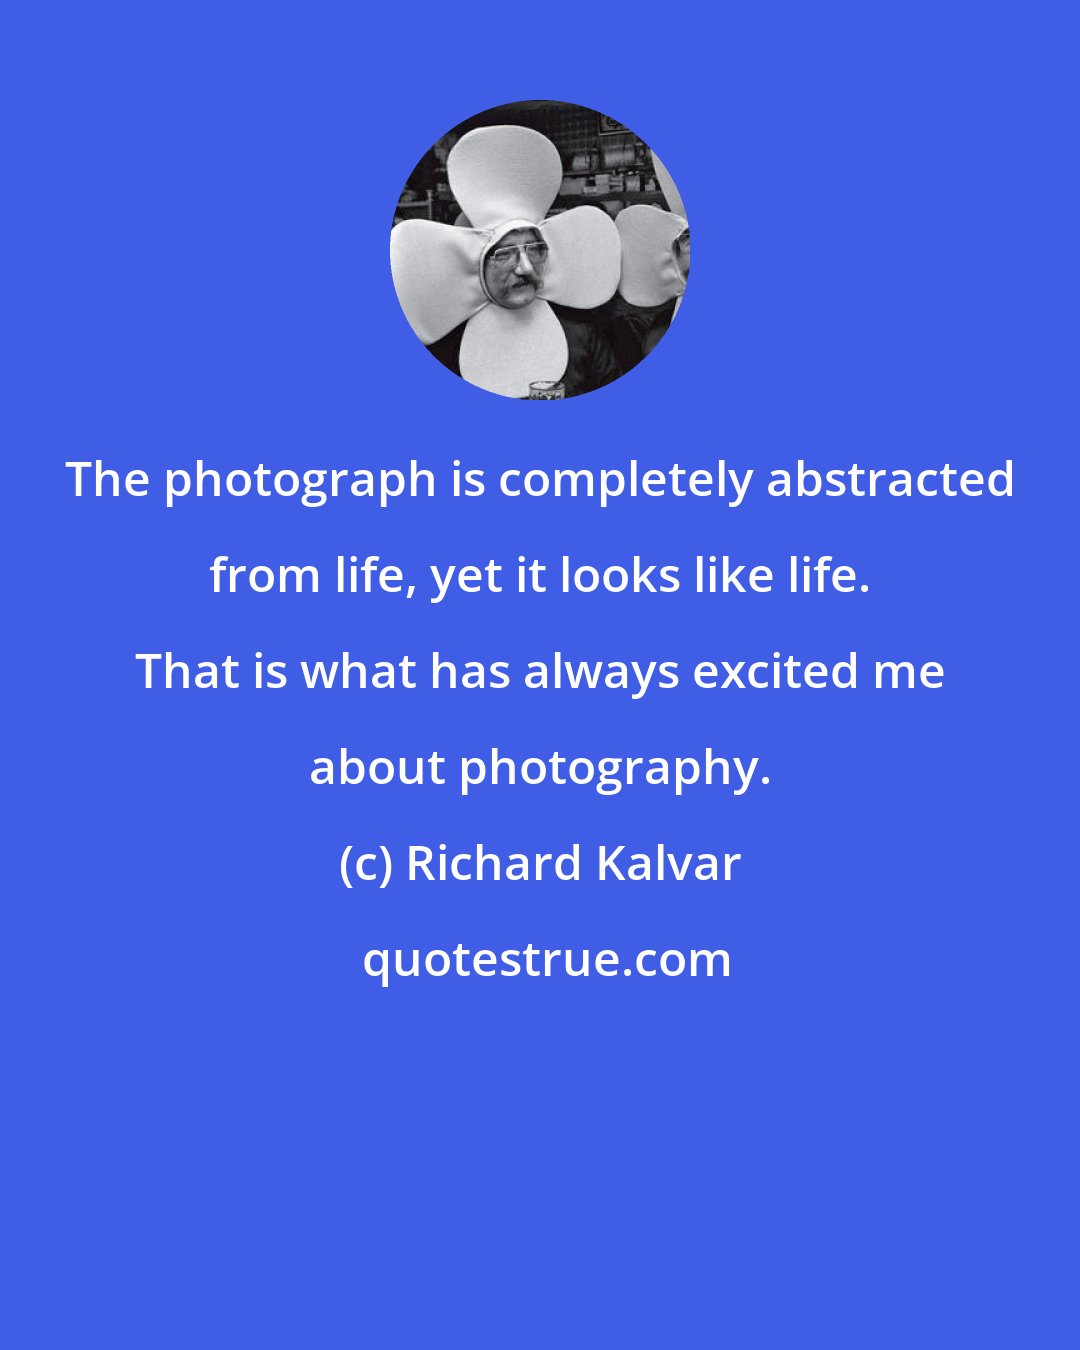 Richard Kalvar: The photograph is completely abstracted from life, yet it looks like life. That is what has always excited me about photography.